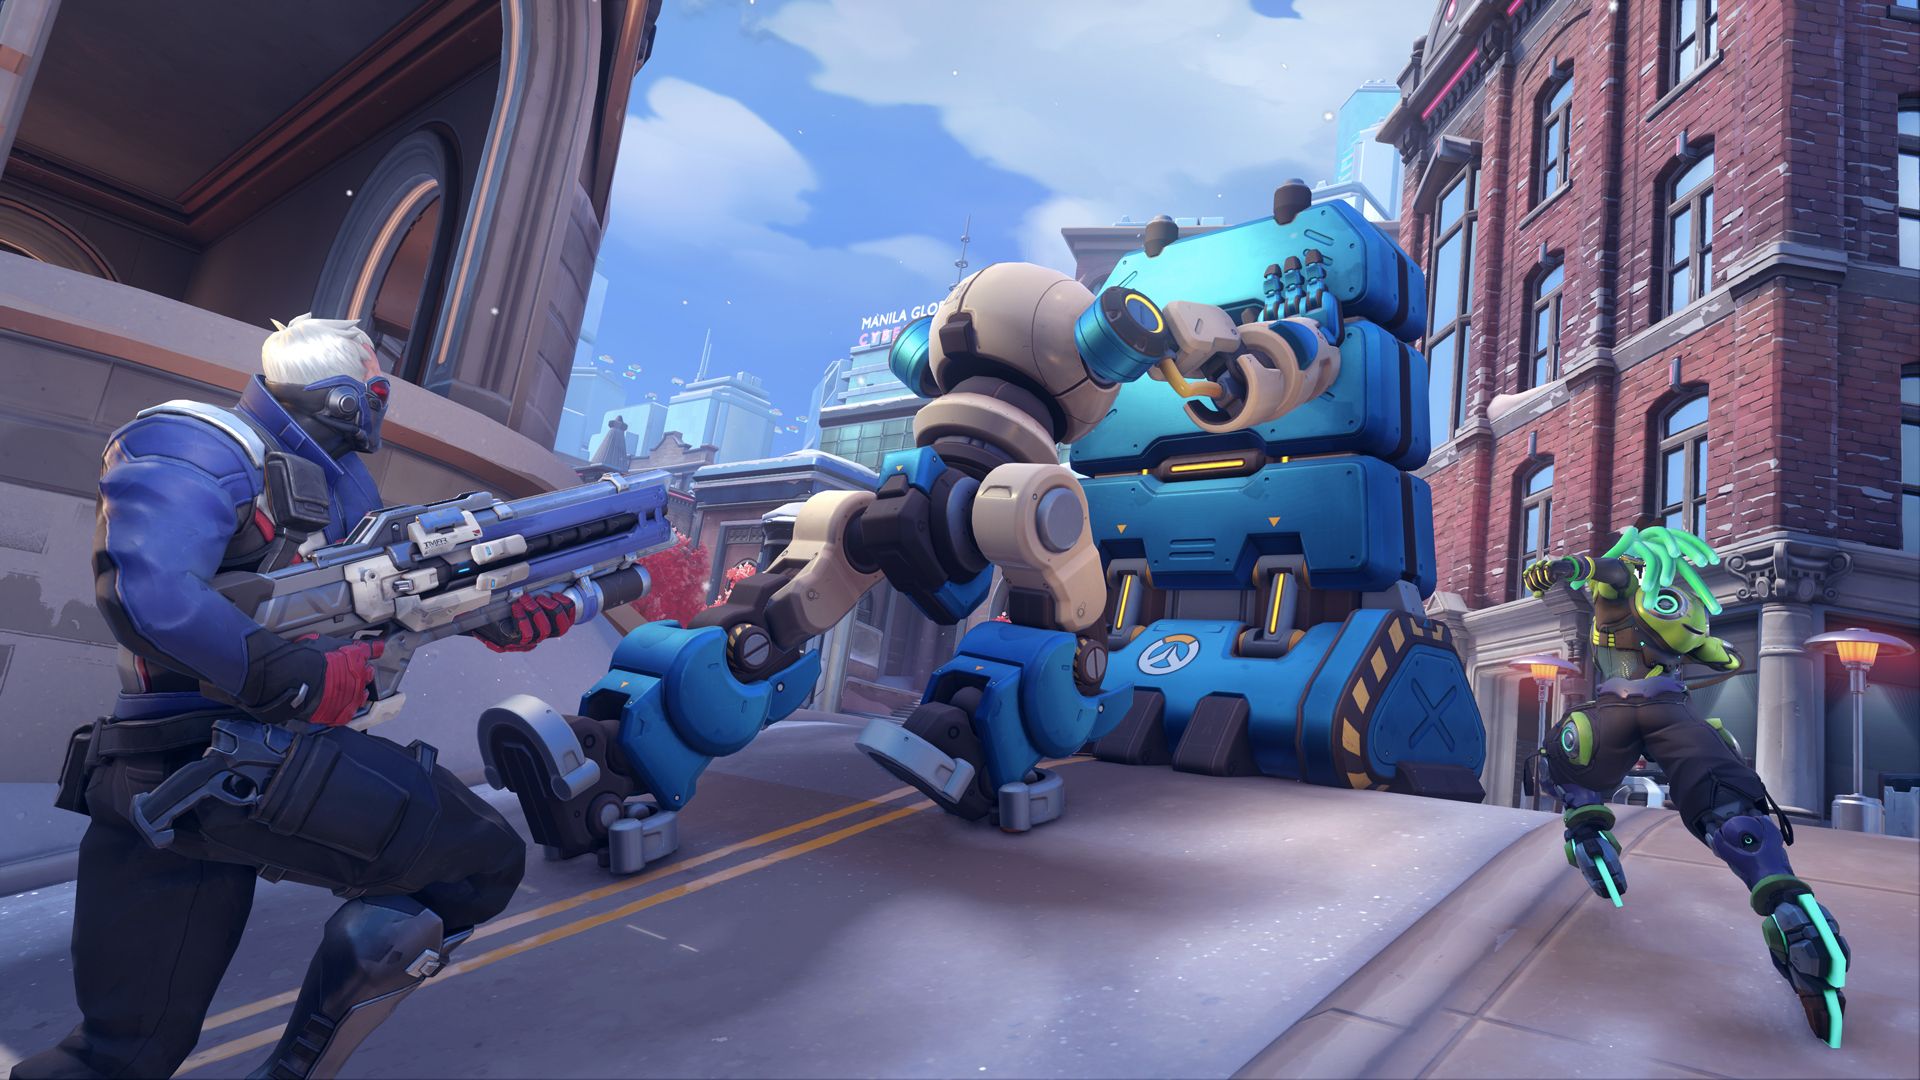 In this article, we are going to be going over everything about Overwatch 2 Watchpoint pack, so you can decide whether to buy it or not.